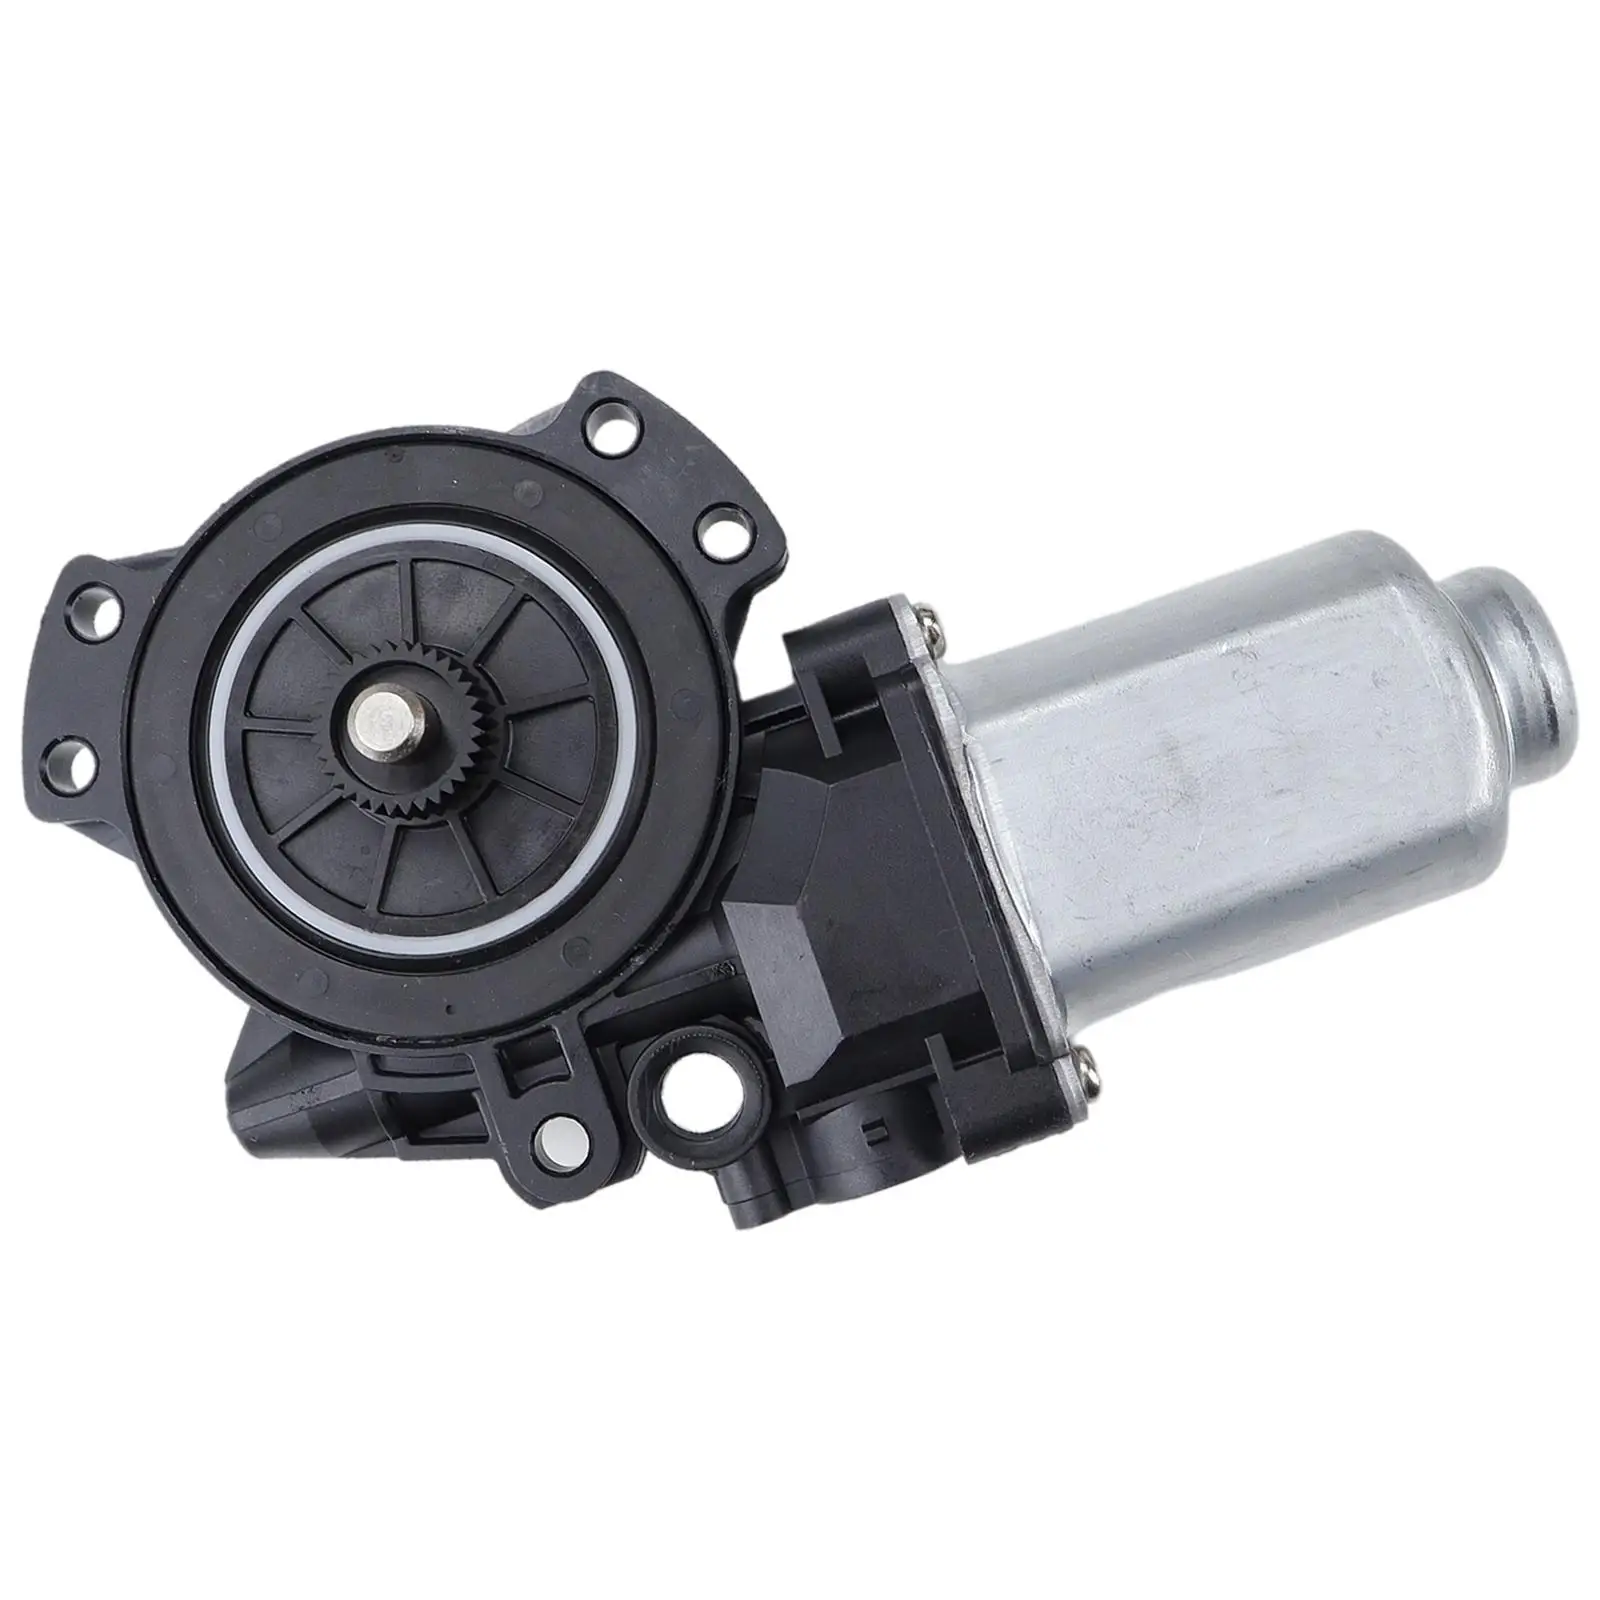 New Car Front  Window Regulator Motor Replacements  Sonata 2006-2010 According to the factory specifications